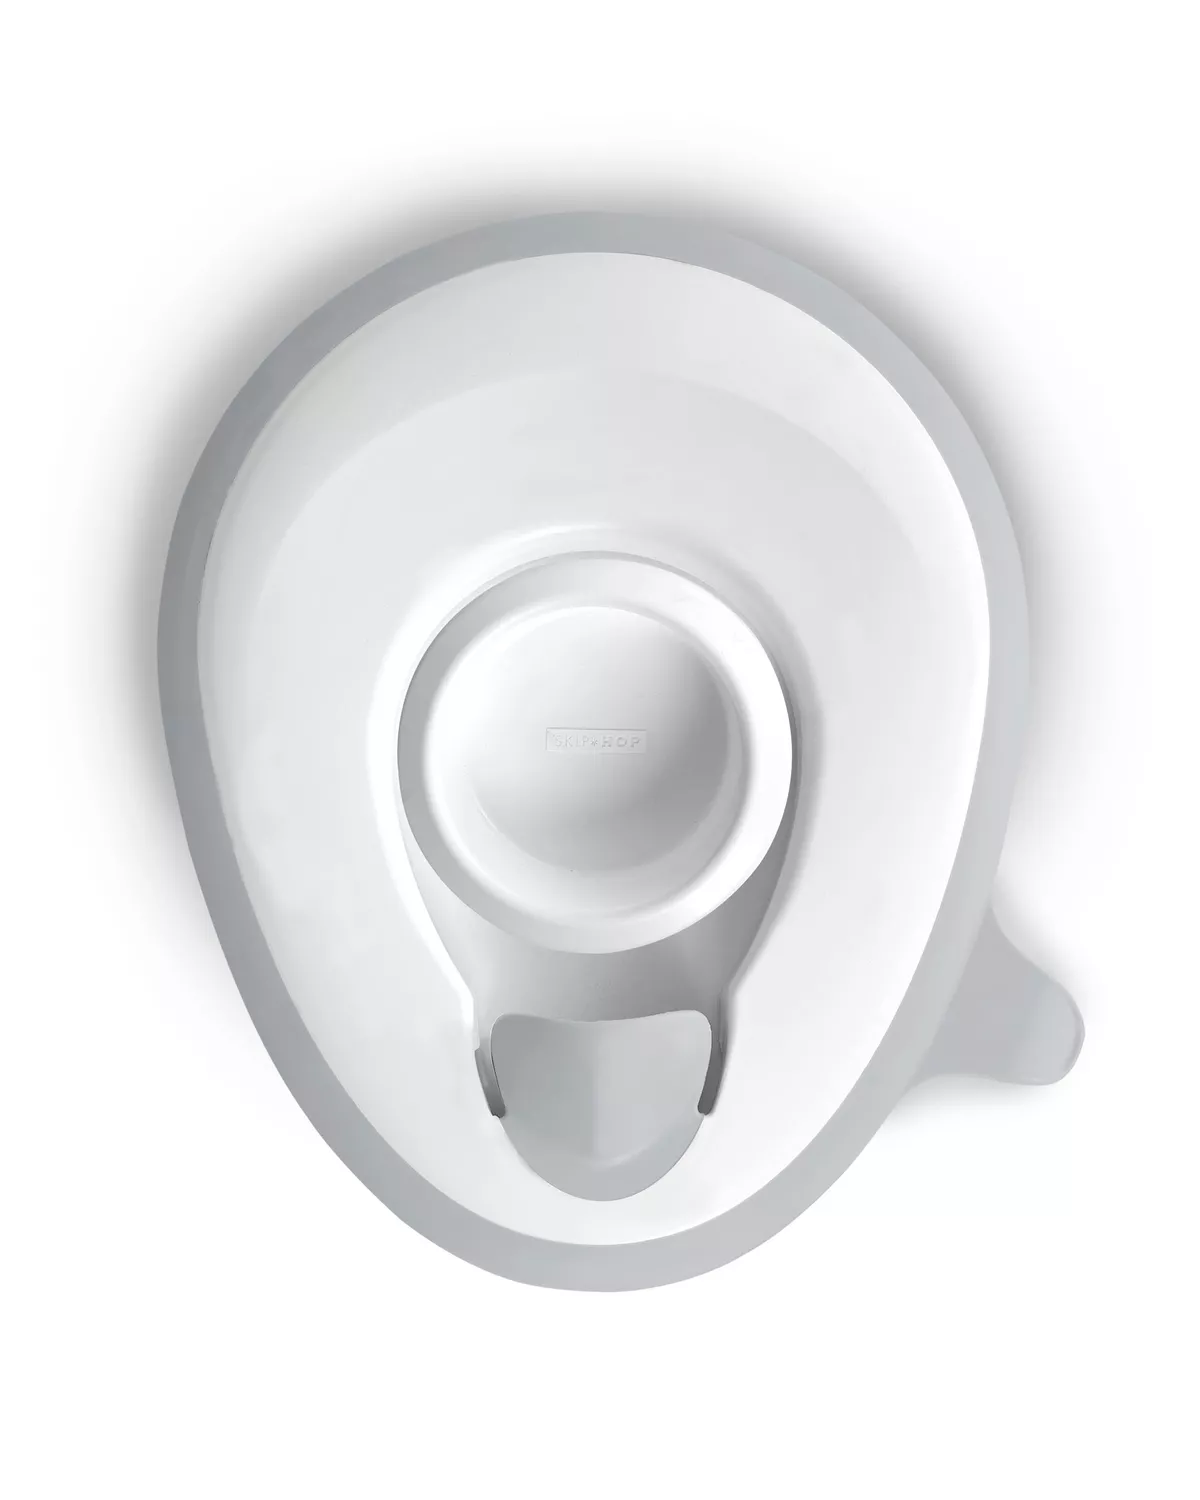 SkipHop Easy-Store Toilet Trainer